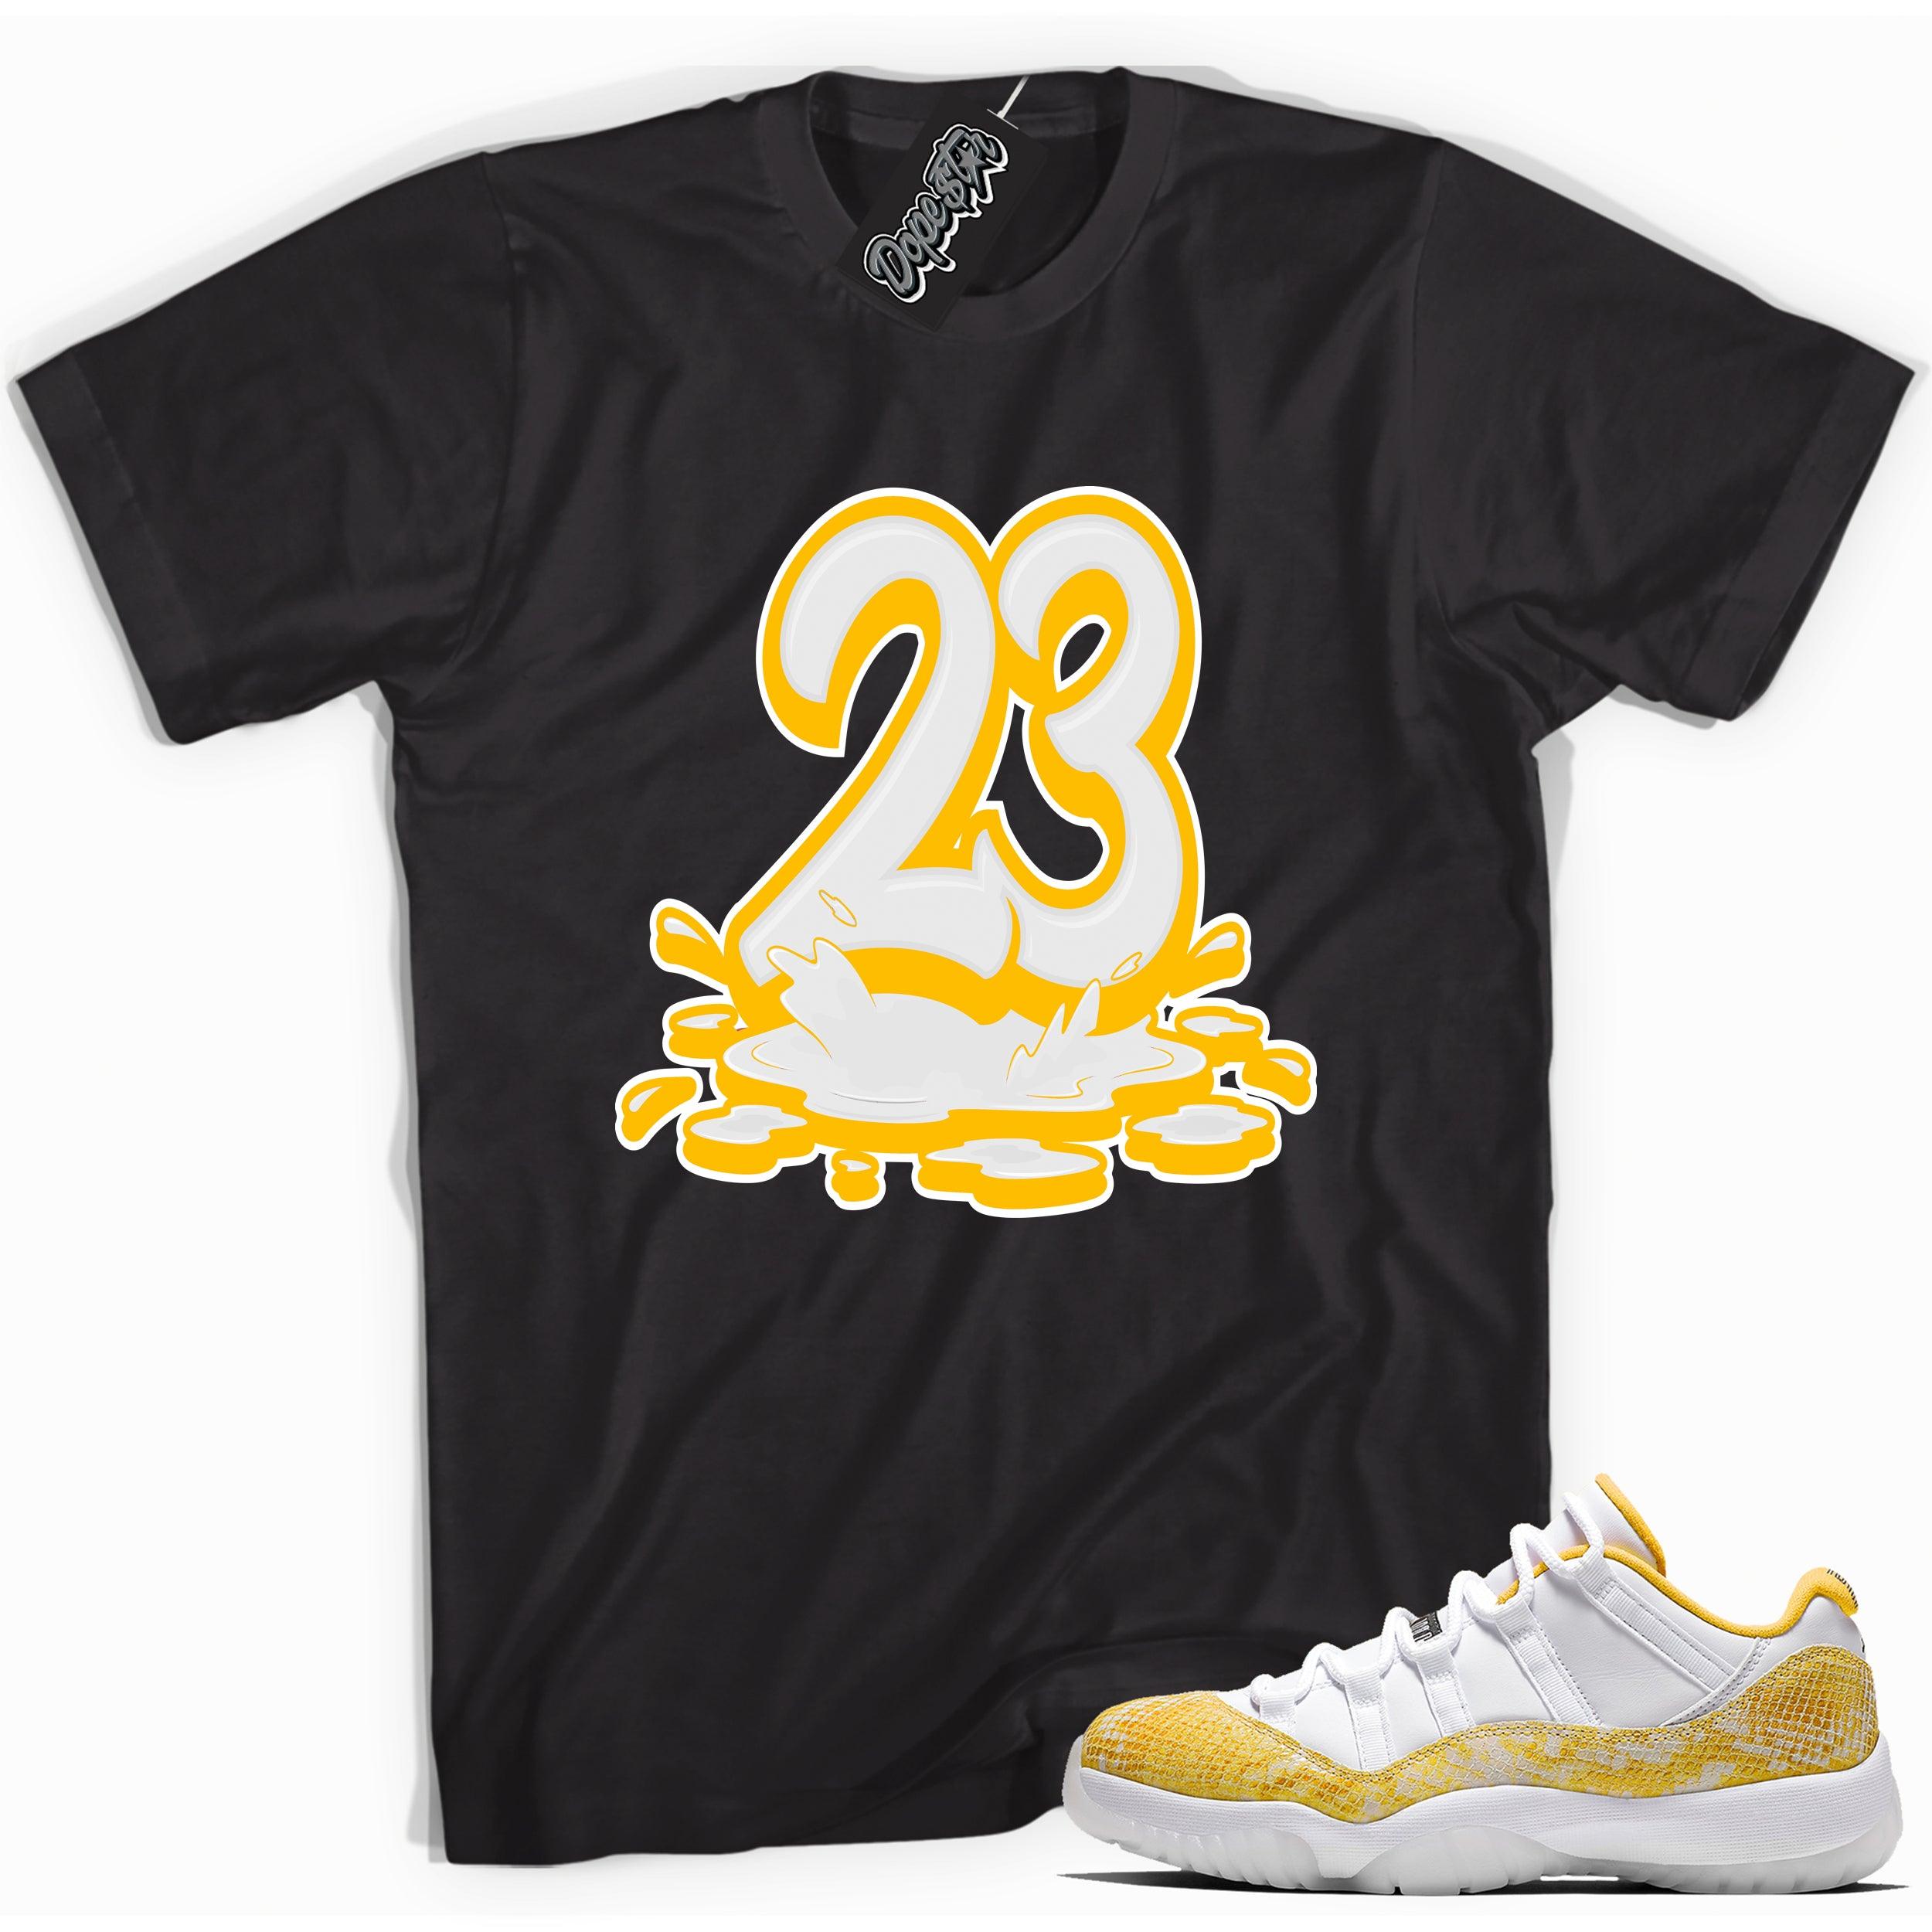 Cool black graphic tee with '23 melting' print, that perfectly matches  Air Jordan 11 Low Yellow Snakeskin sneakers